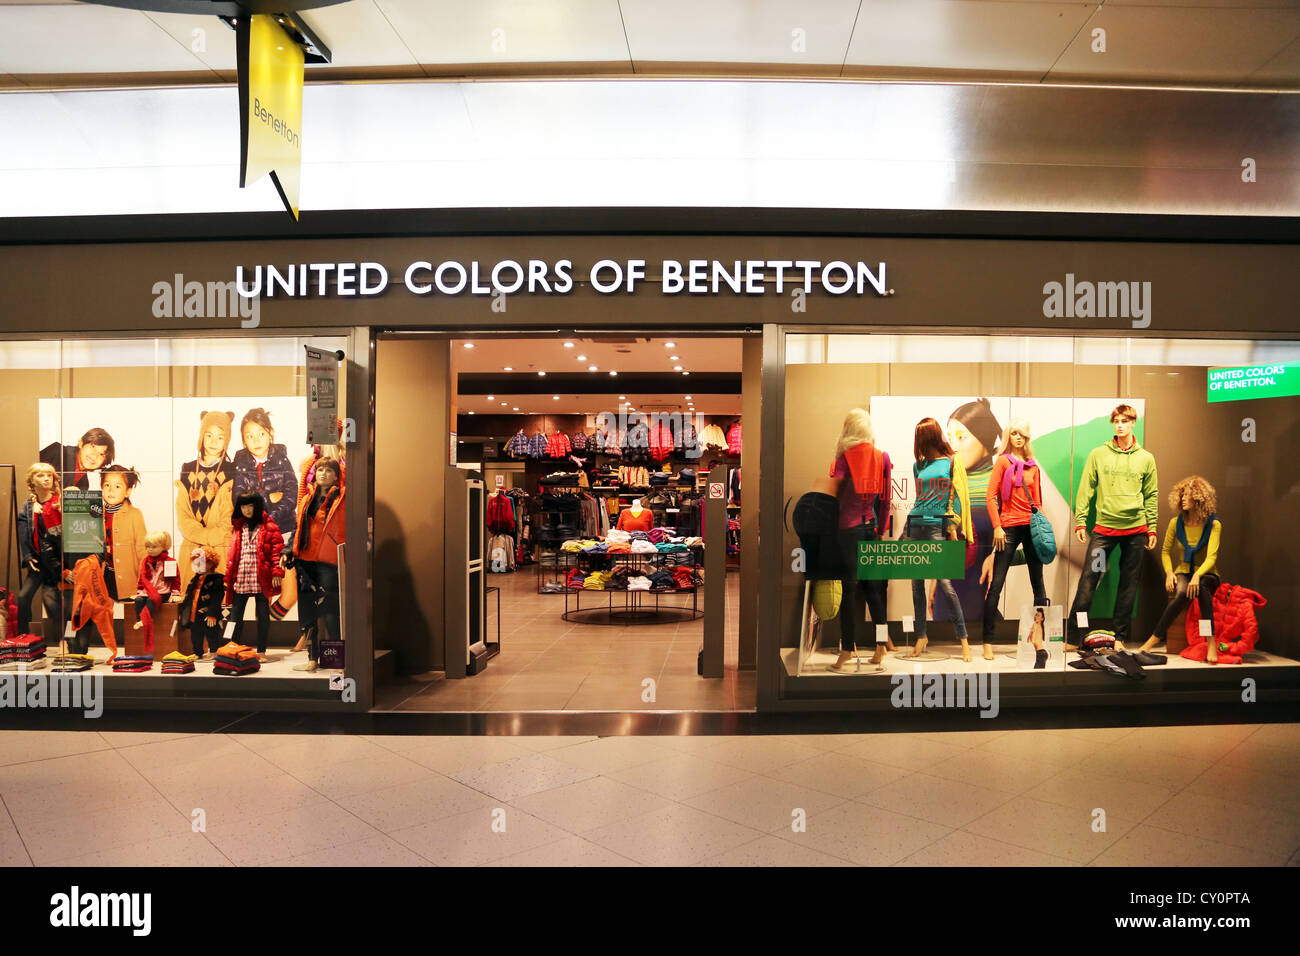 Calais France citer Europe United Colors of Benetton Clothes Shop Photo  Stock - Alamy